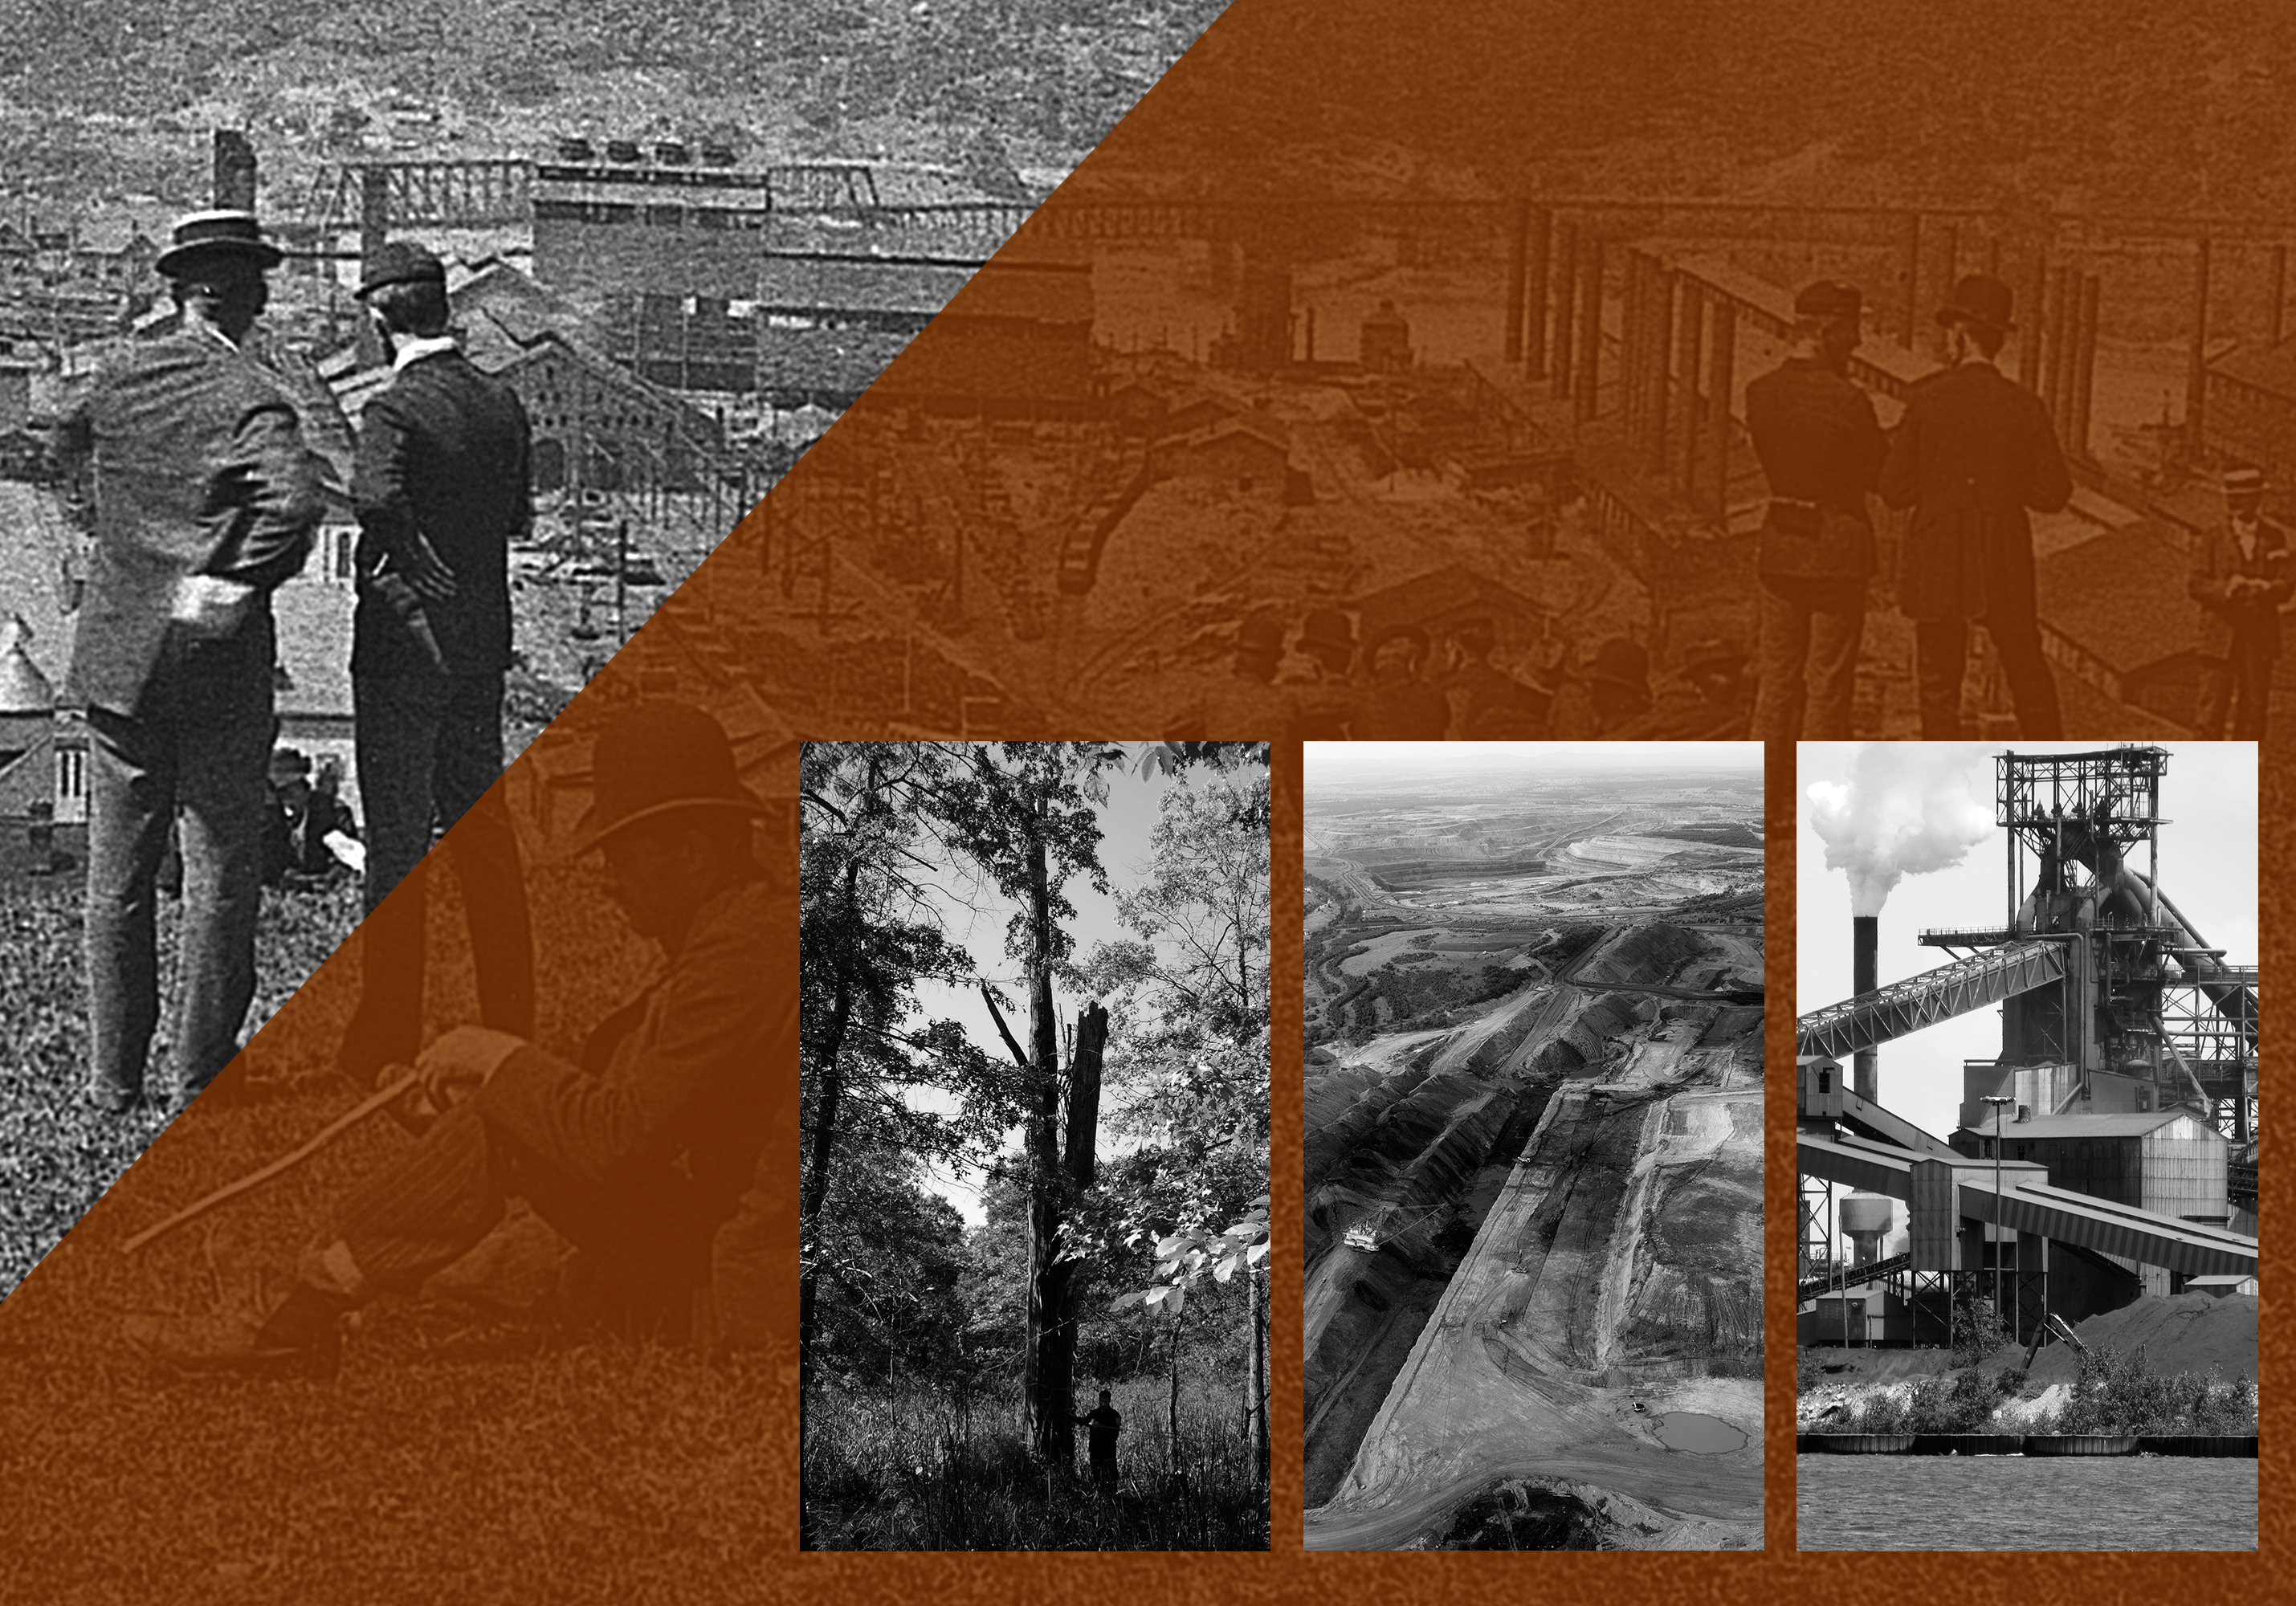 black and white and sepia collage showing infrastructure, construction, nature, with figures in the top left corner